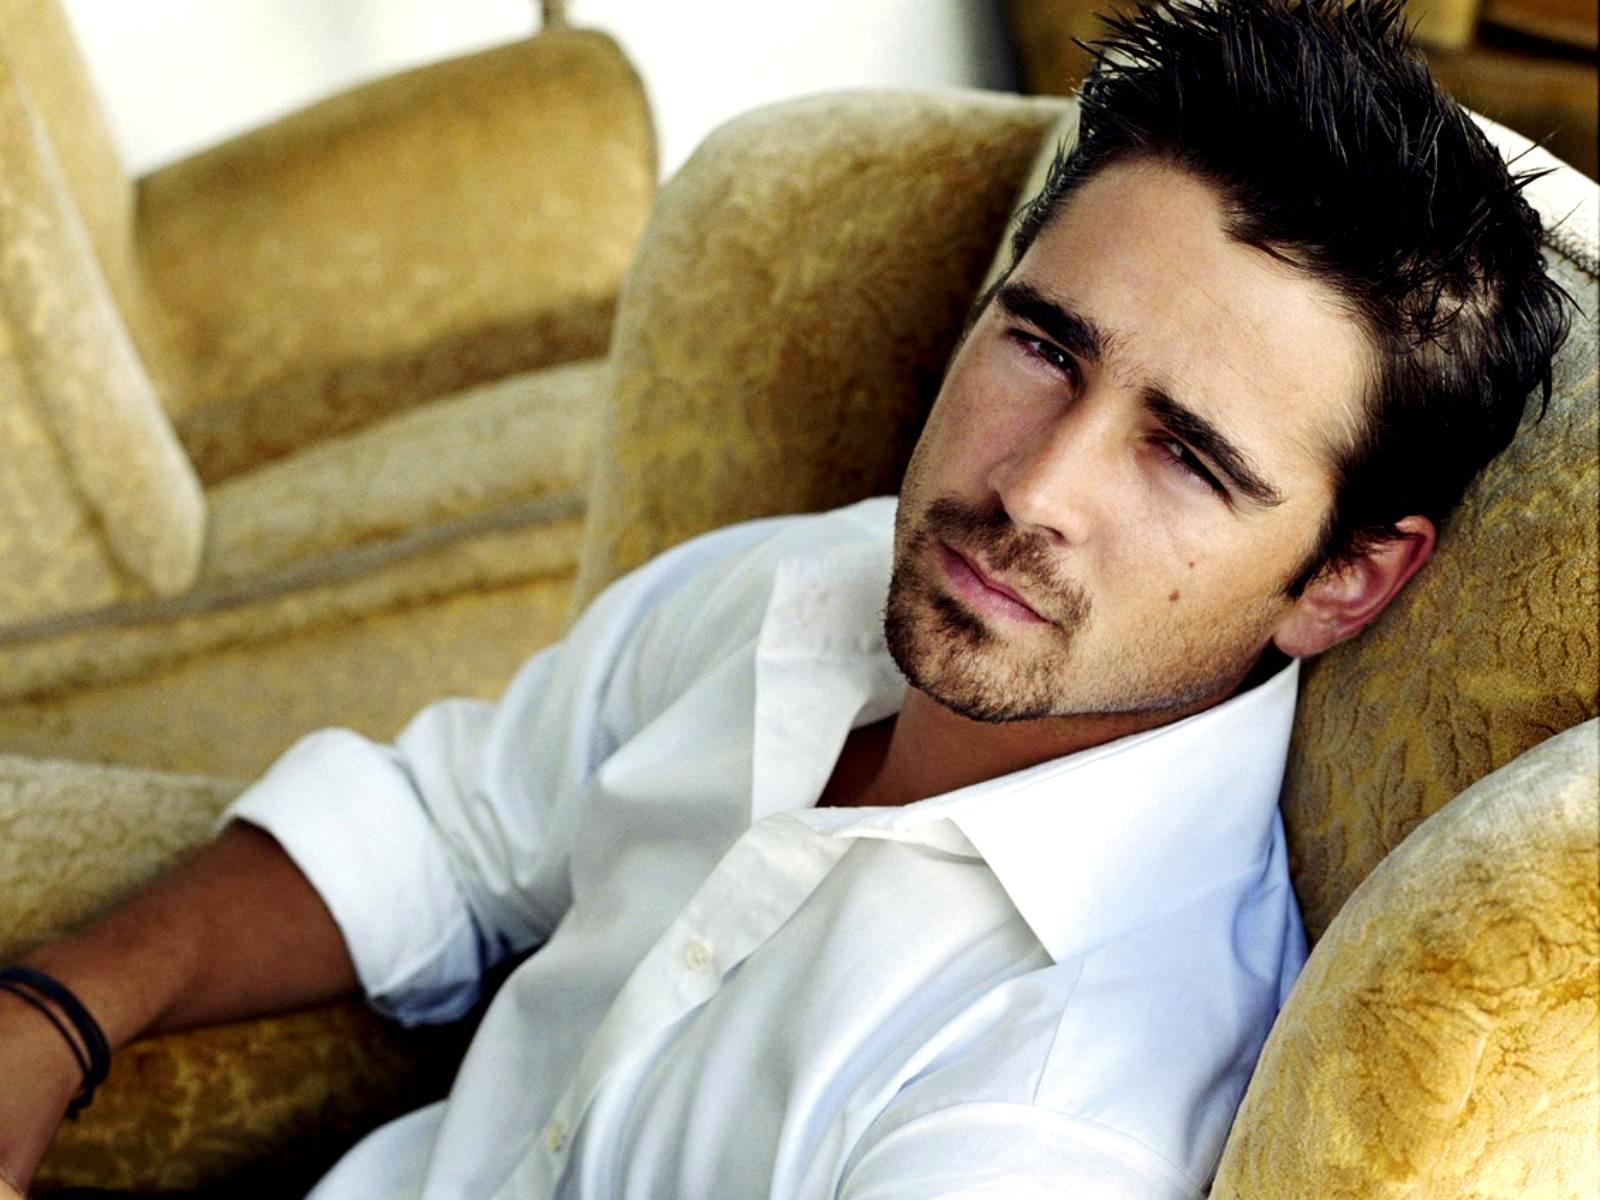 Colin Farrell Wallpaper And Image Pictures Photos